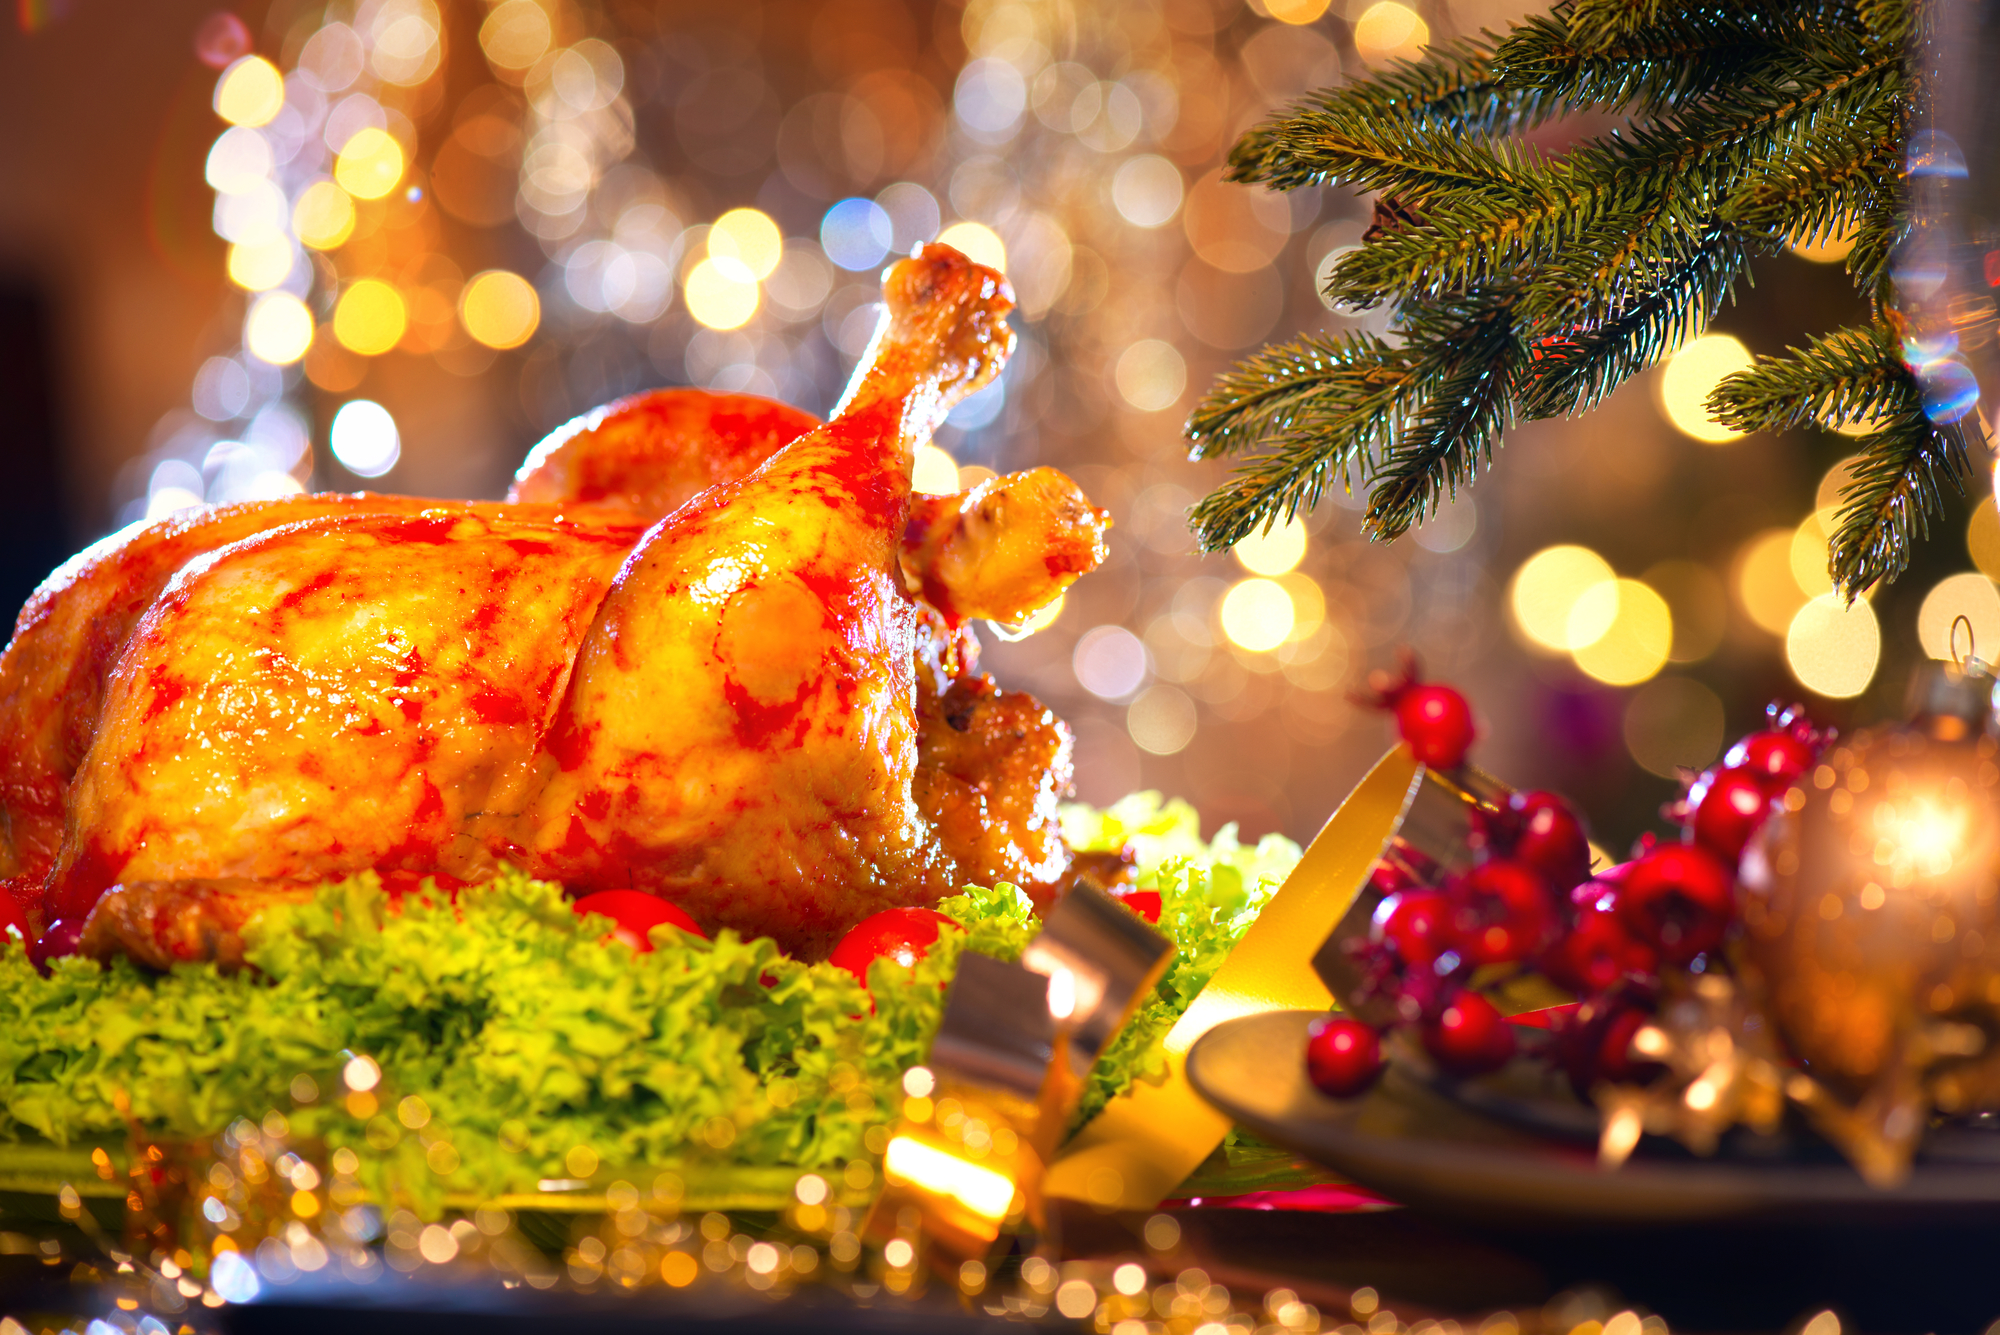 Christmas dinner. Holiday decorated table with roasted turkey - The Fit ...